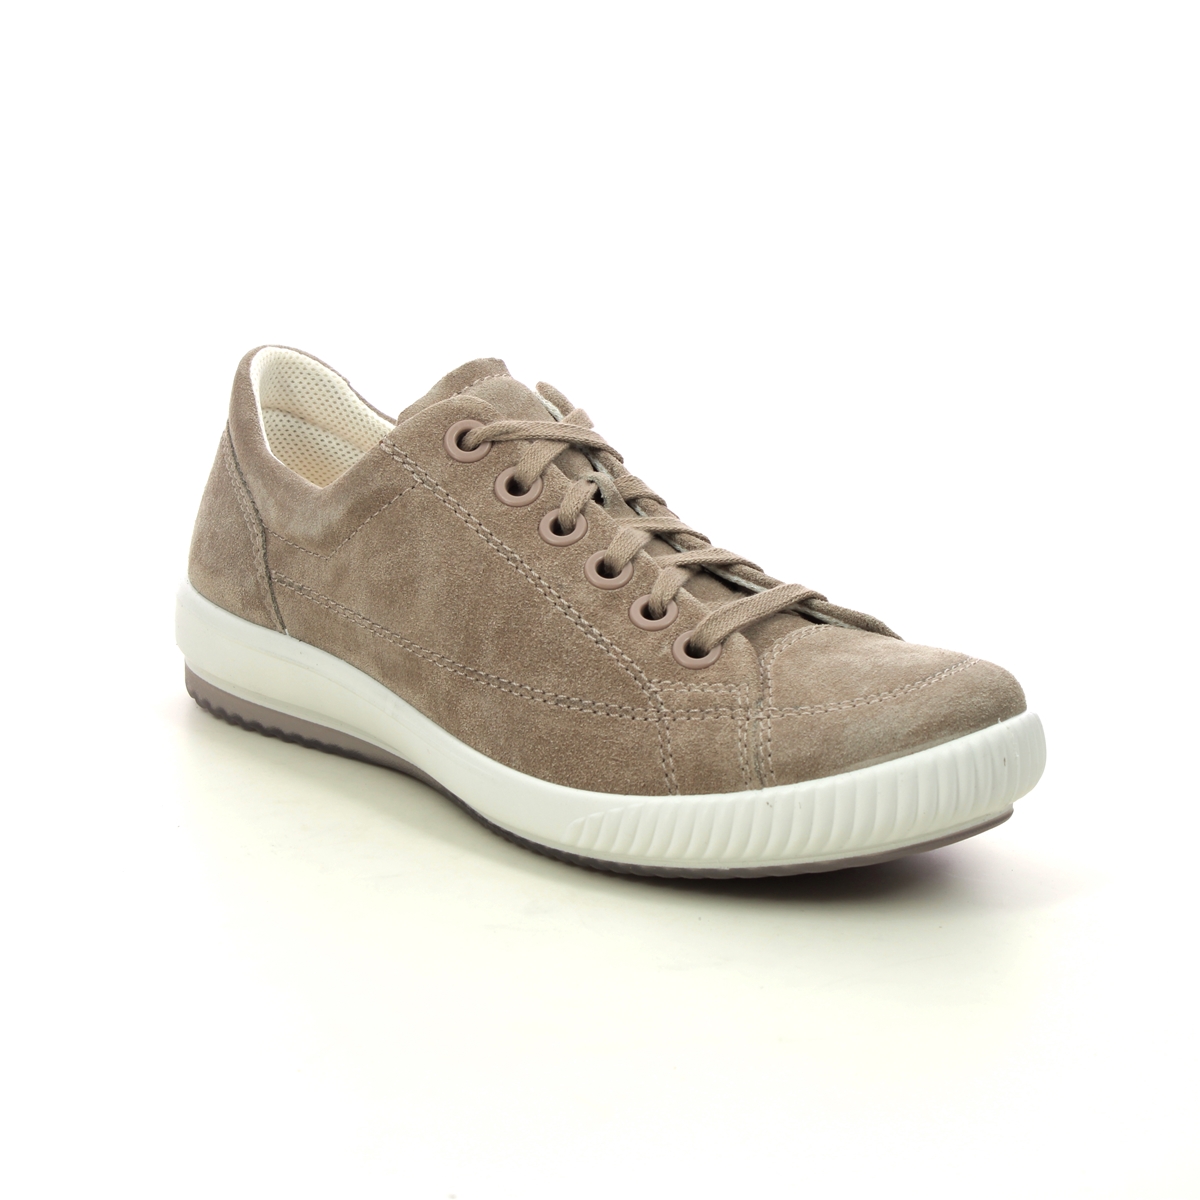 Legero Tanaro 5 Stitch Beige suede Womens lacing shoes 2000161-4500 in a Plain Leather in Size 7